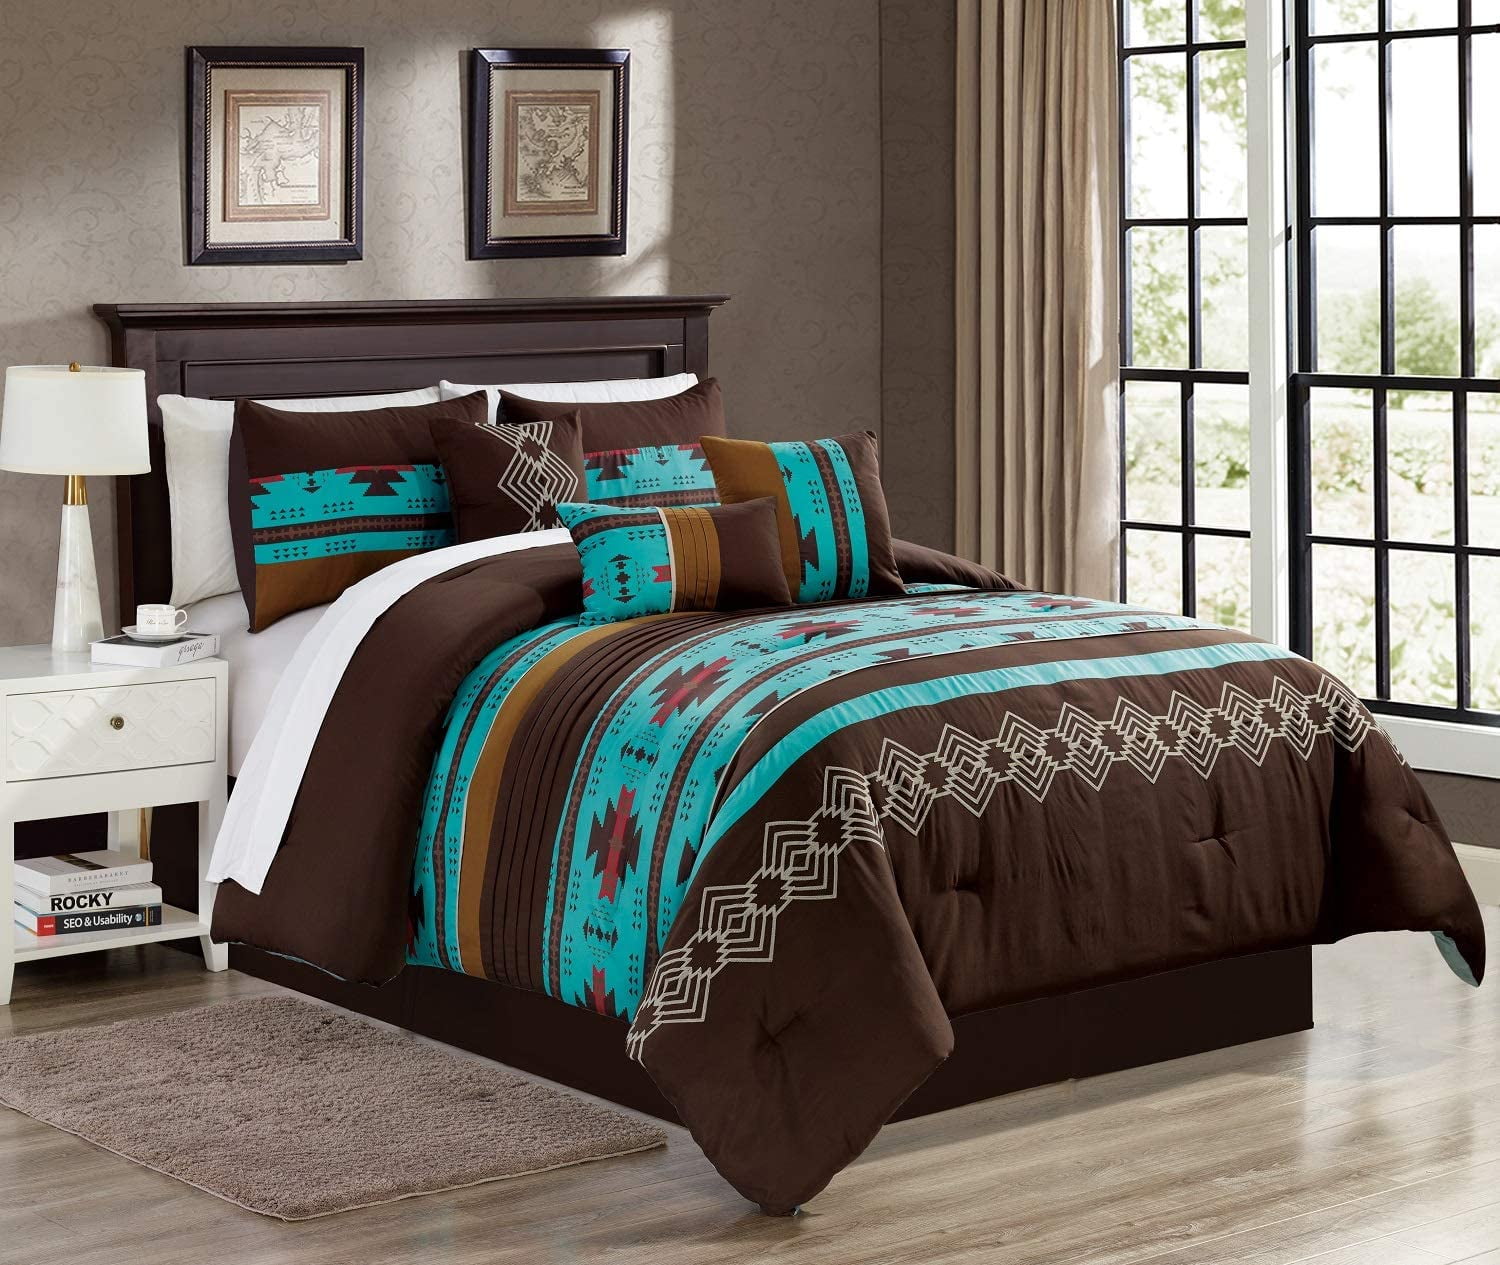 Details about   Clearance Print Comforter Set with 2 Pillow Shams Microfiber King Queen Bedding 